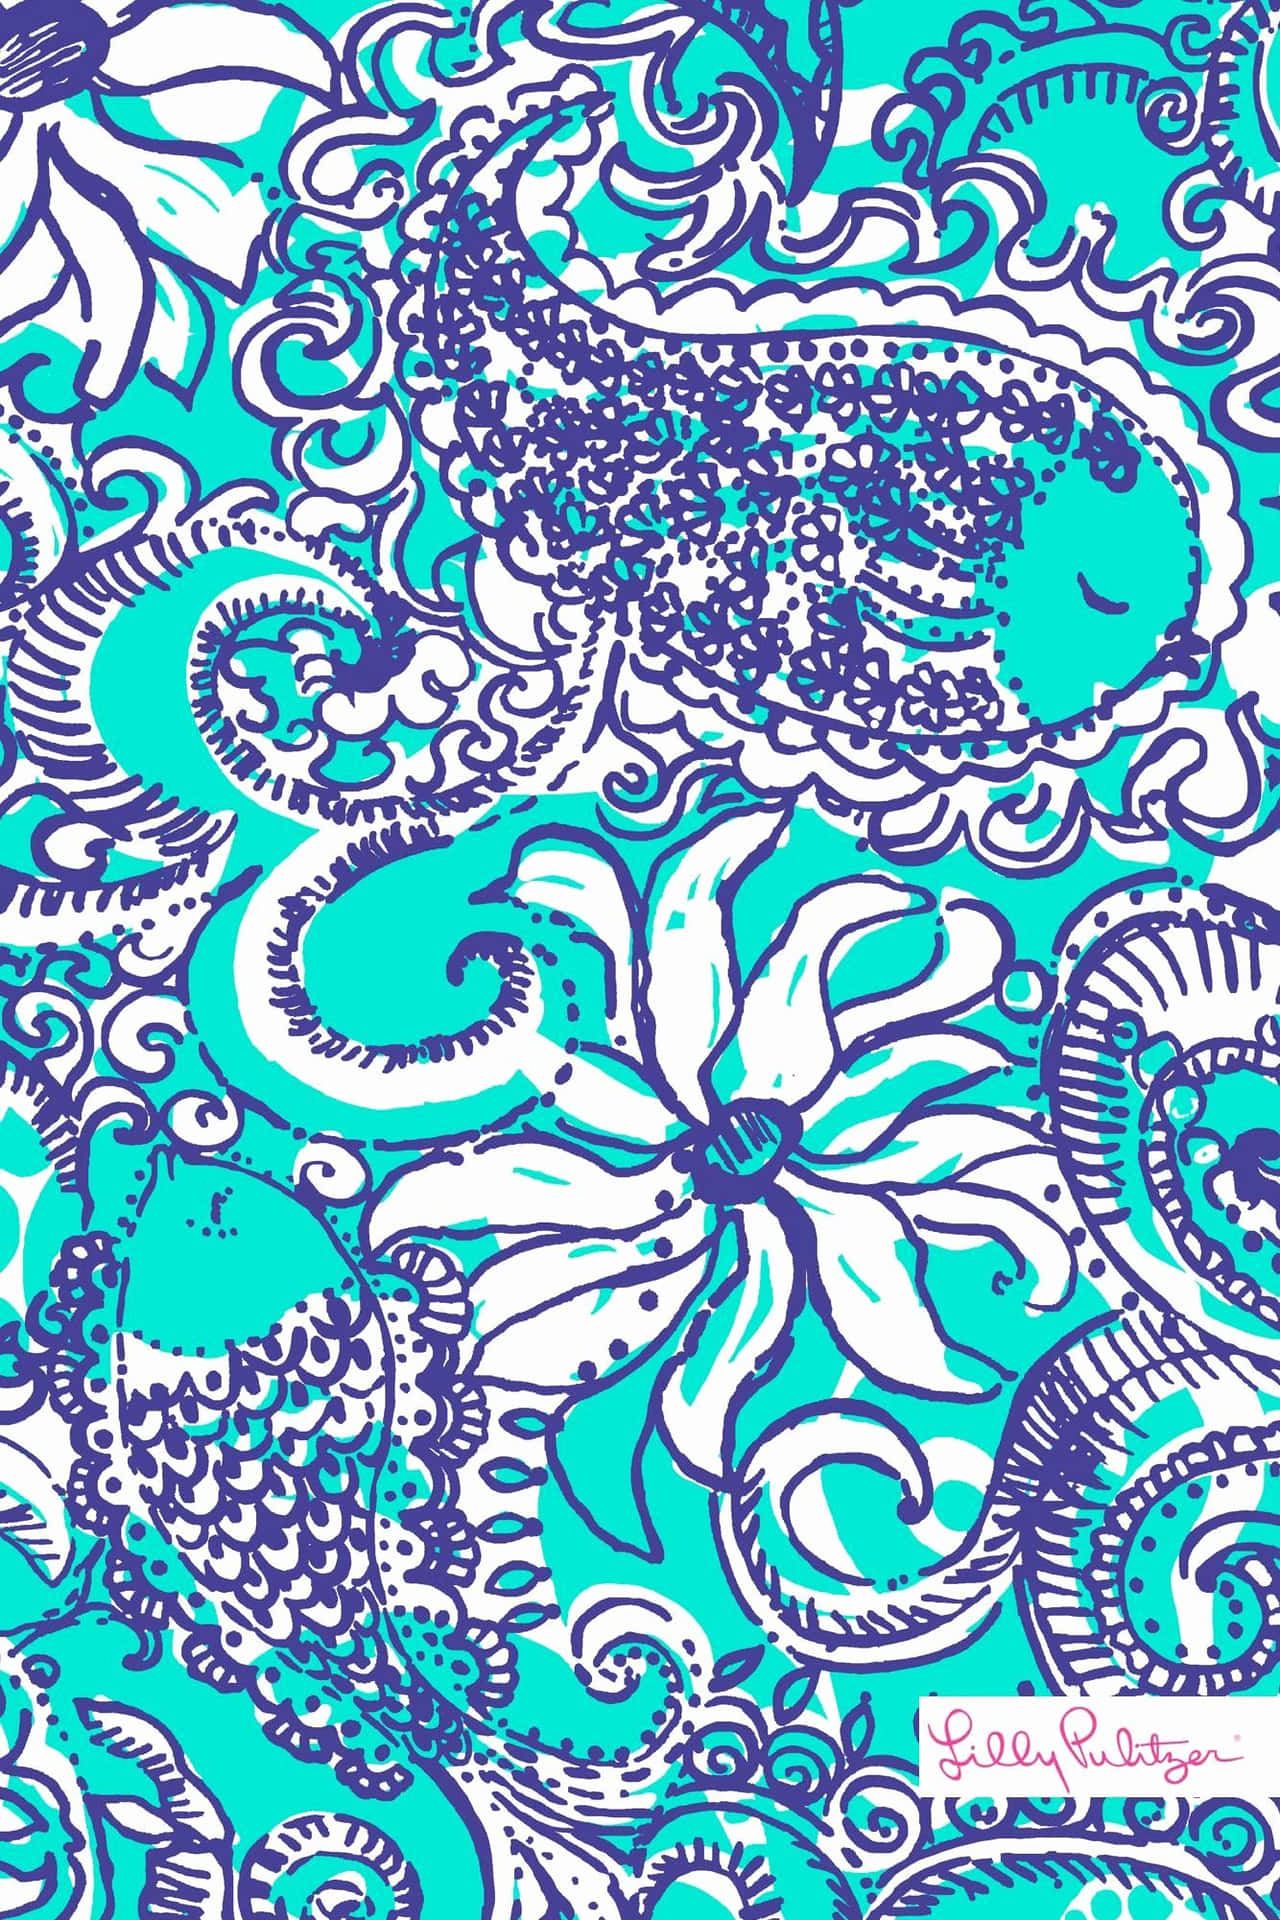 Look stylish in Lilly Pulitzer